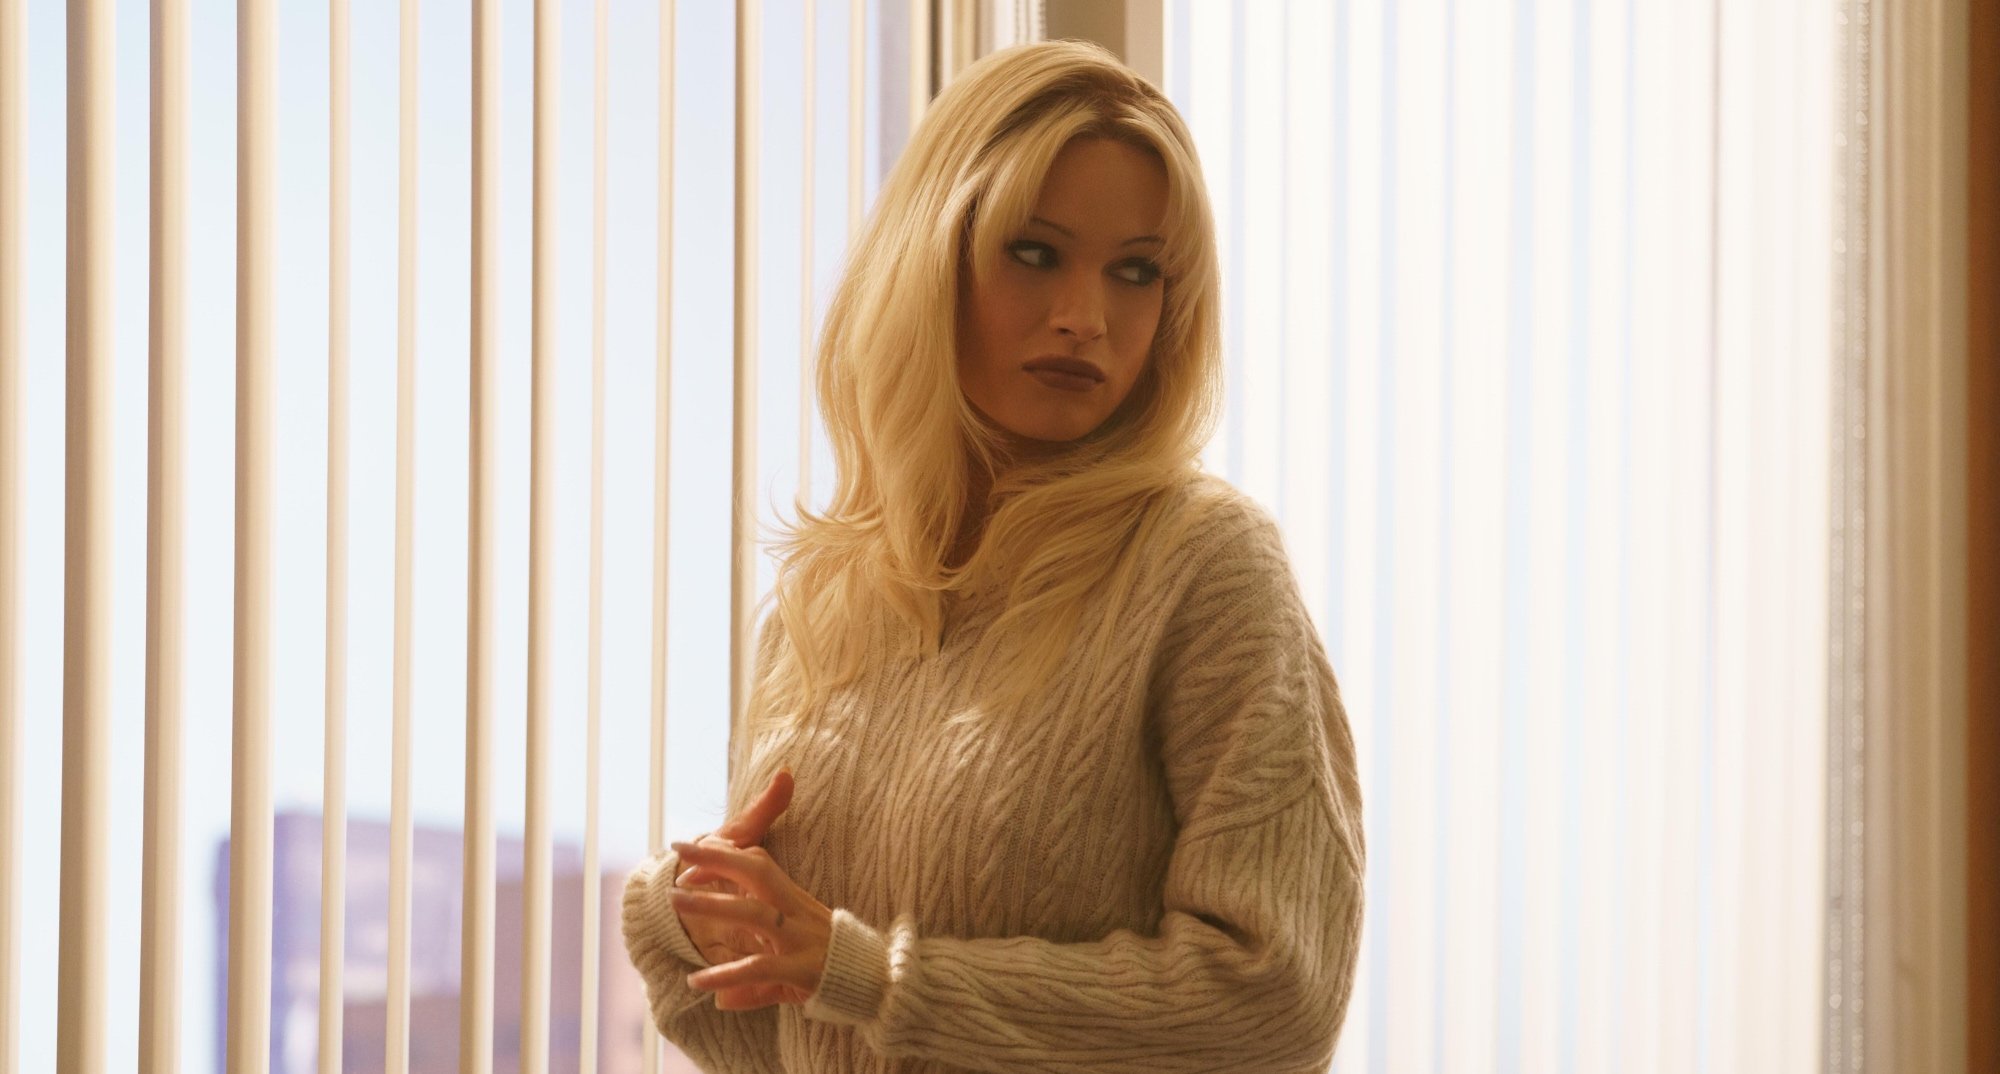 Lily James as Pamela Anderson in 'Pam & Tommy' wearing knit sweater.